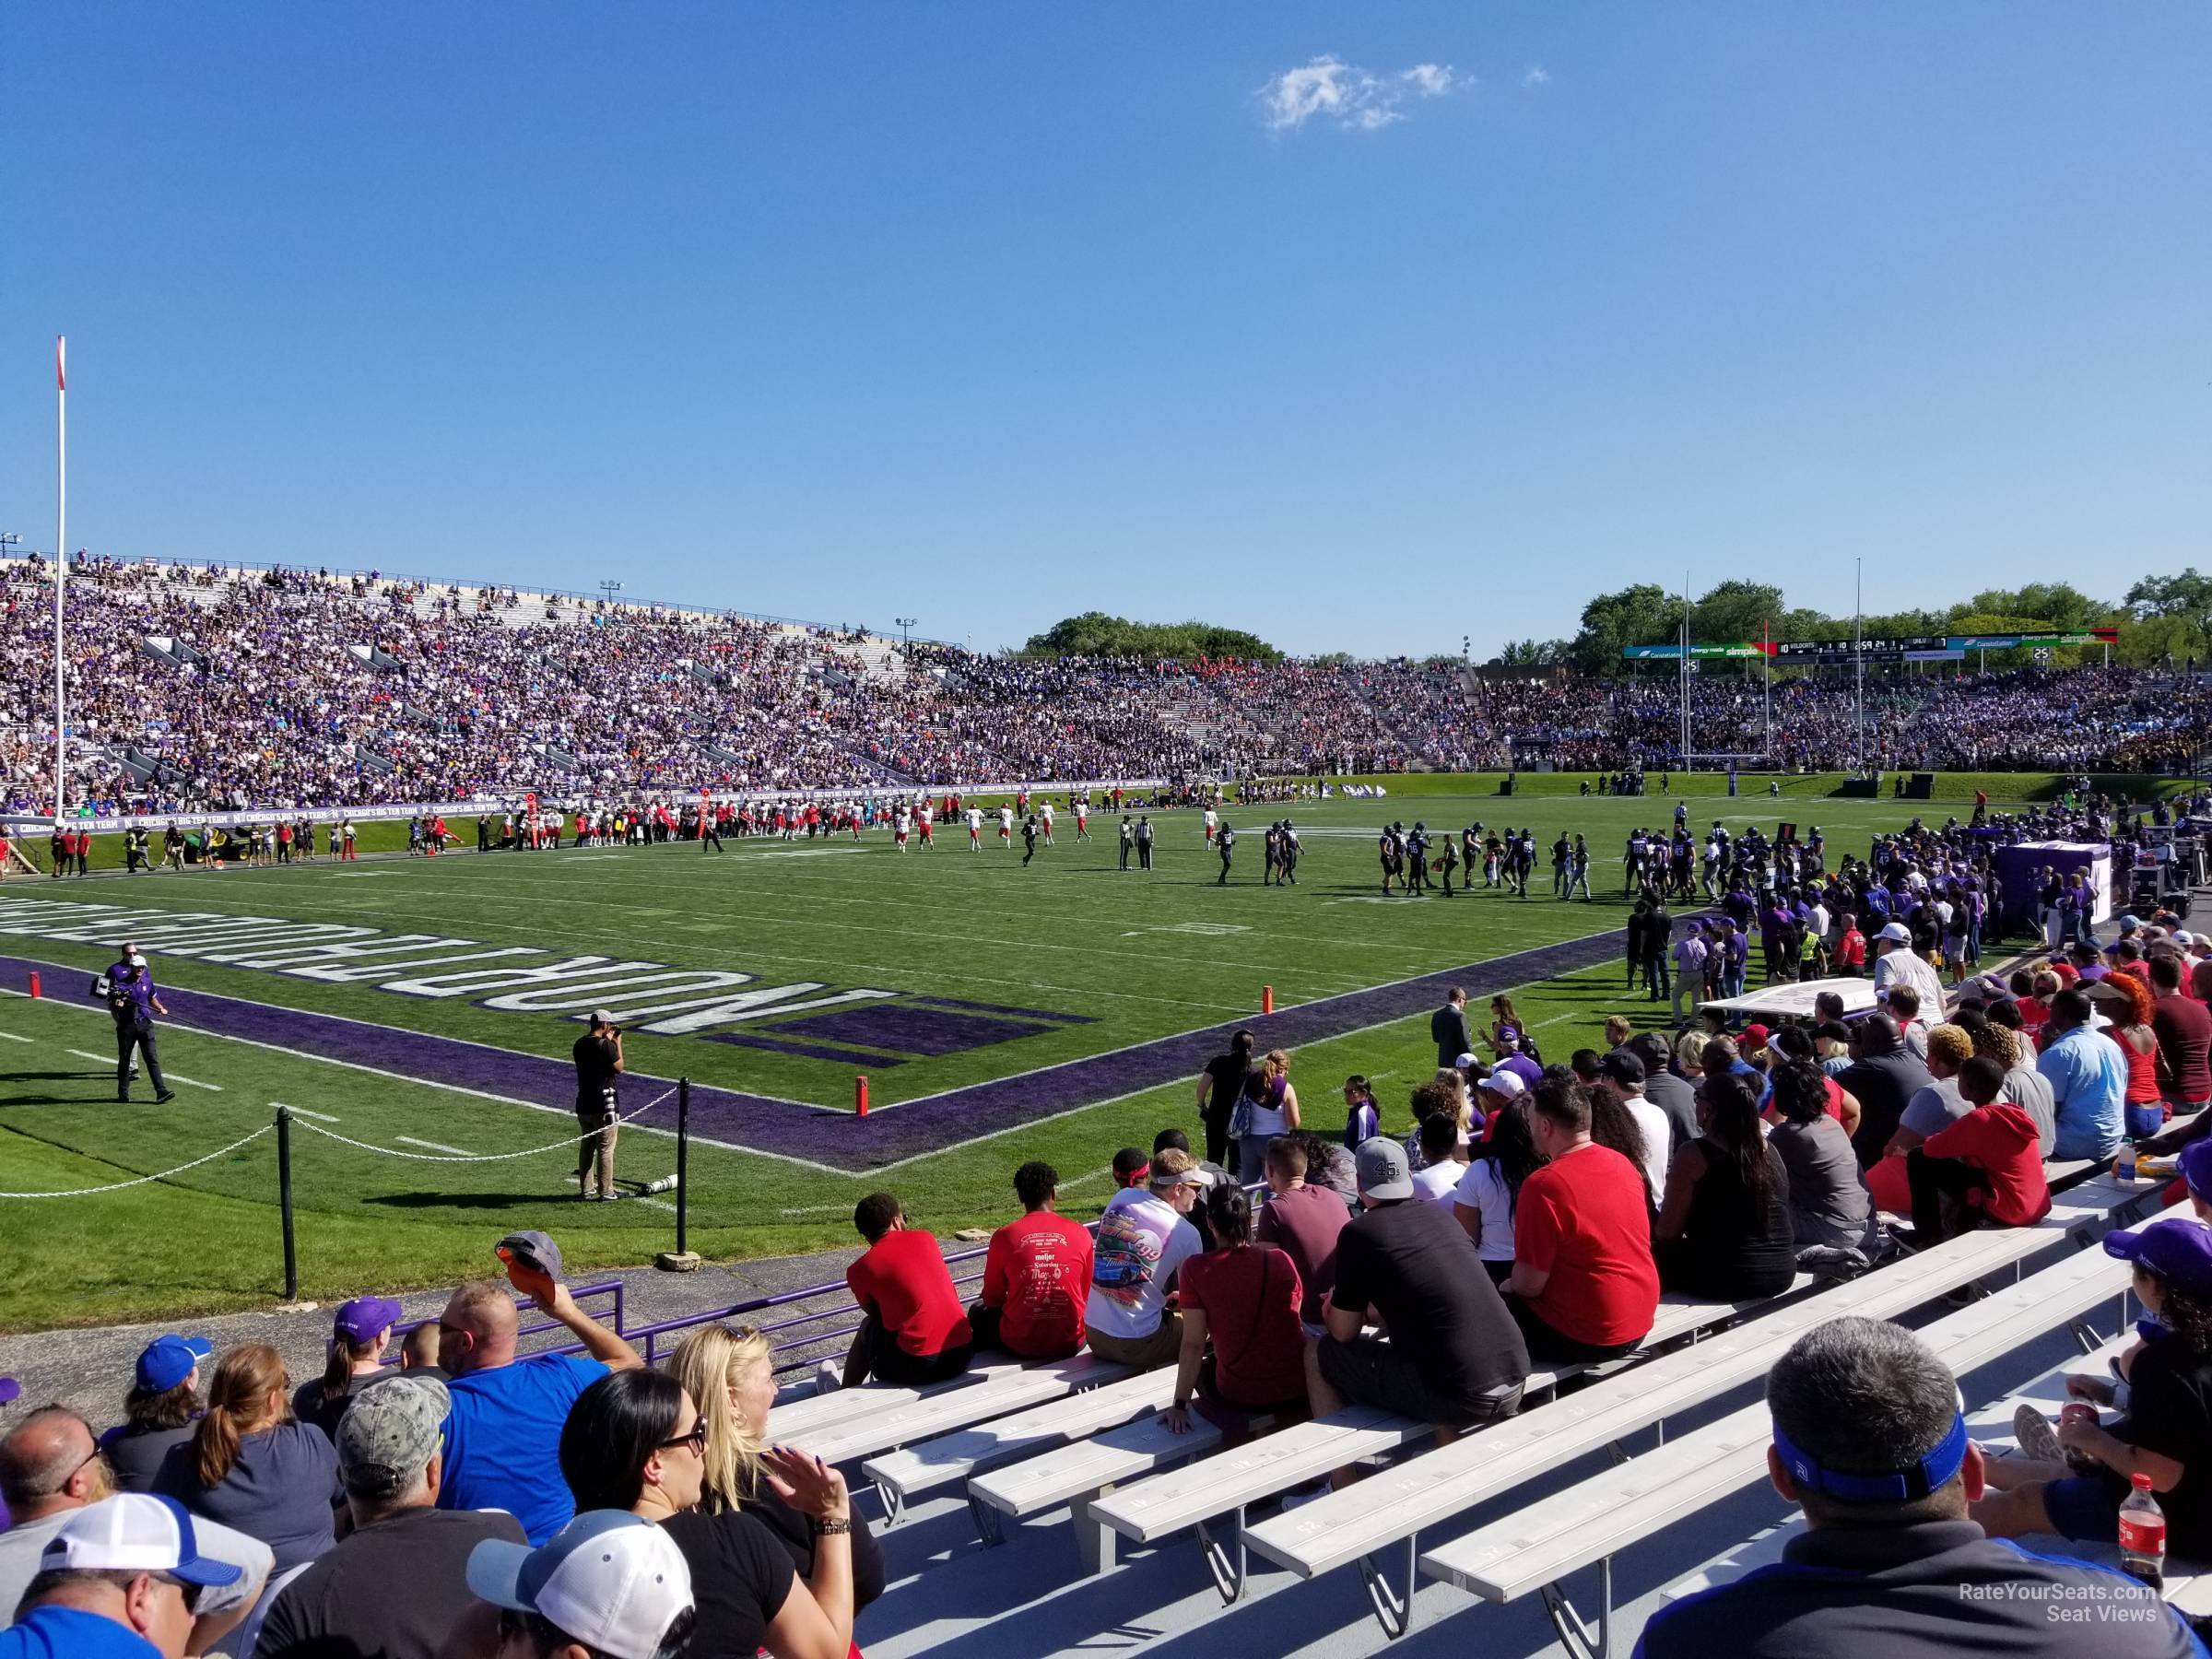 section 135, row 11 seat view  - ryan field